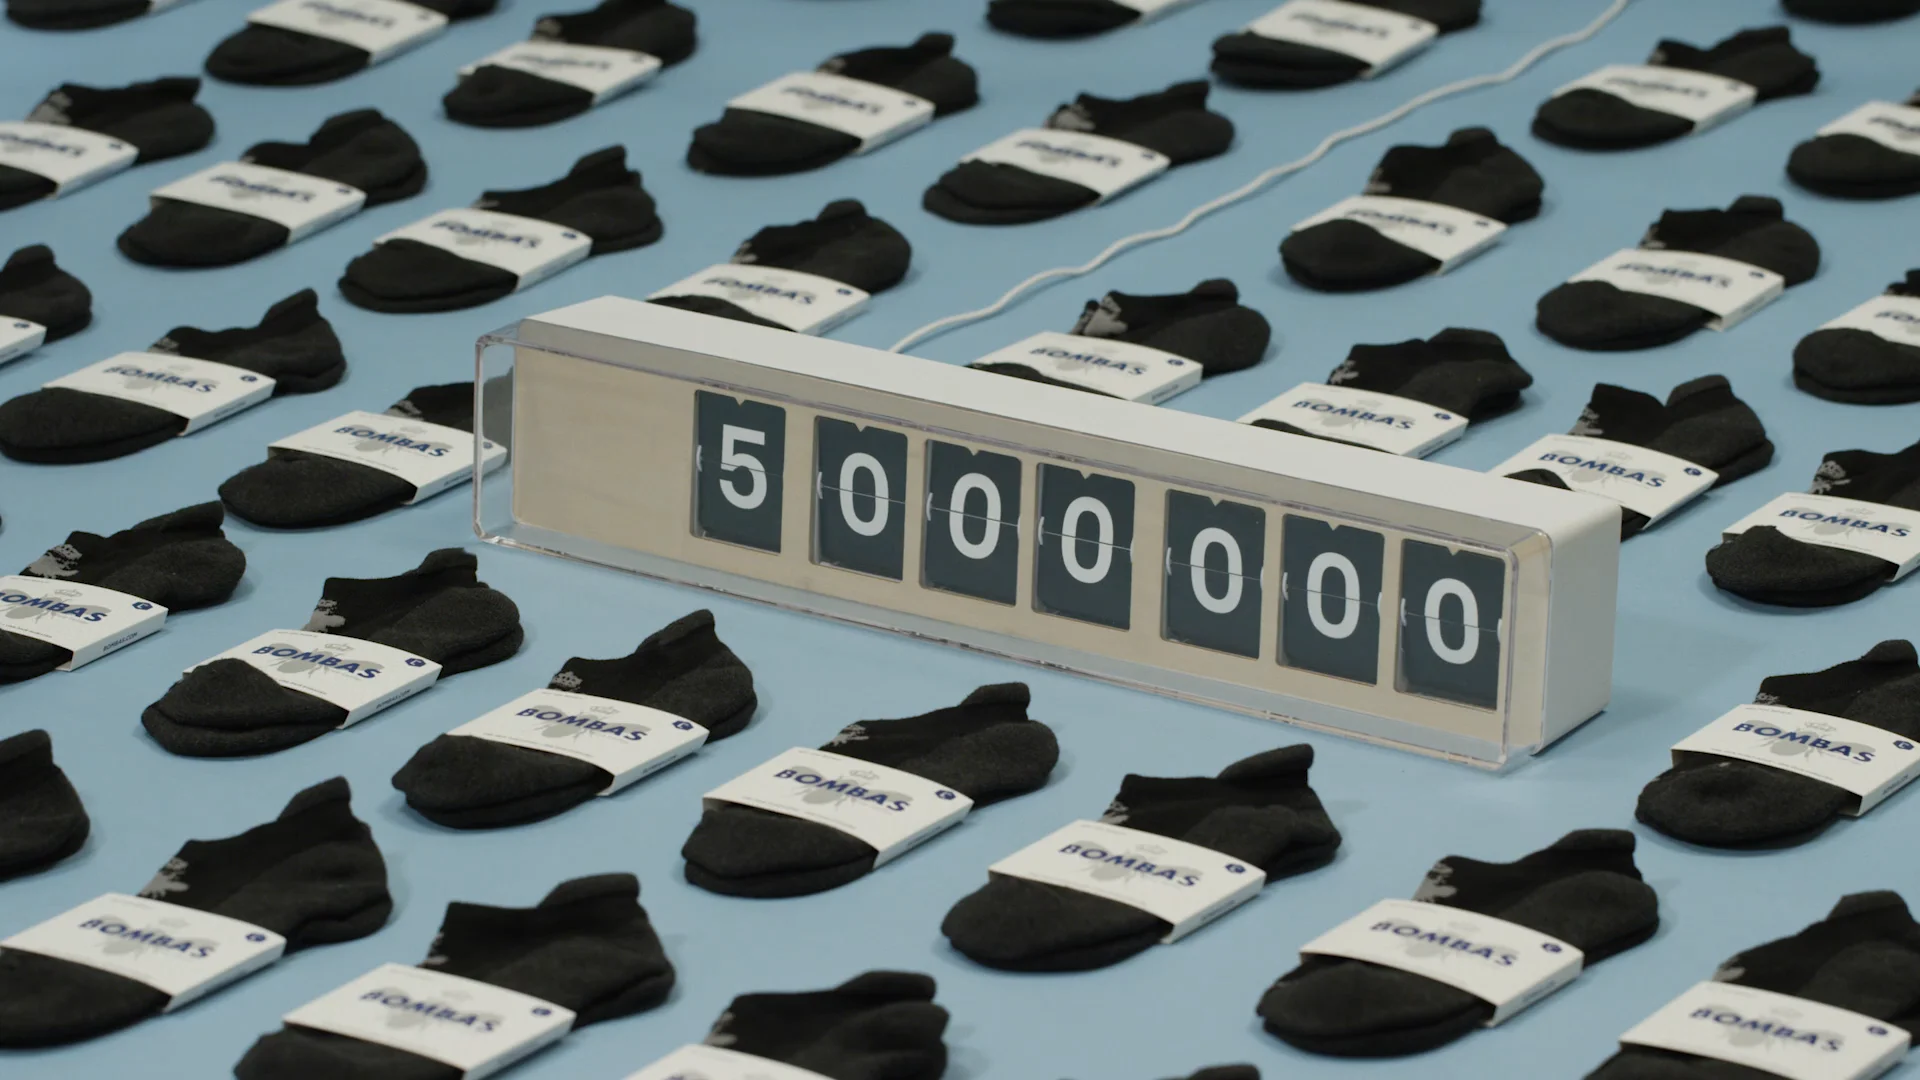 The Most Important Pair of Socks in the World on Vimeo